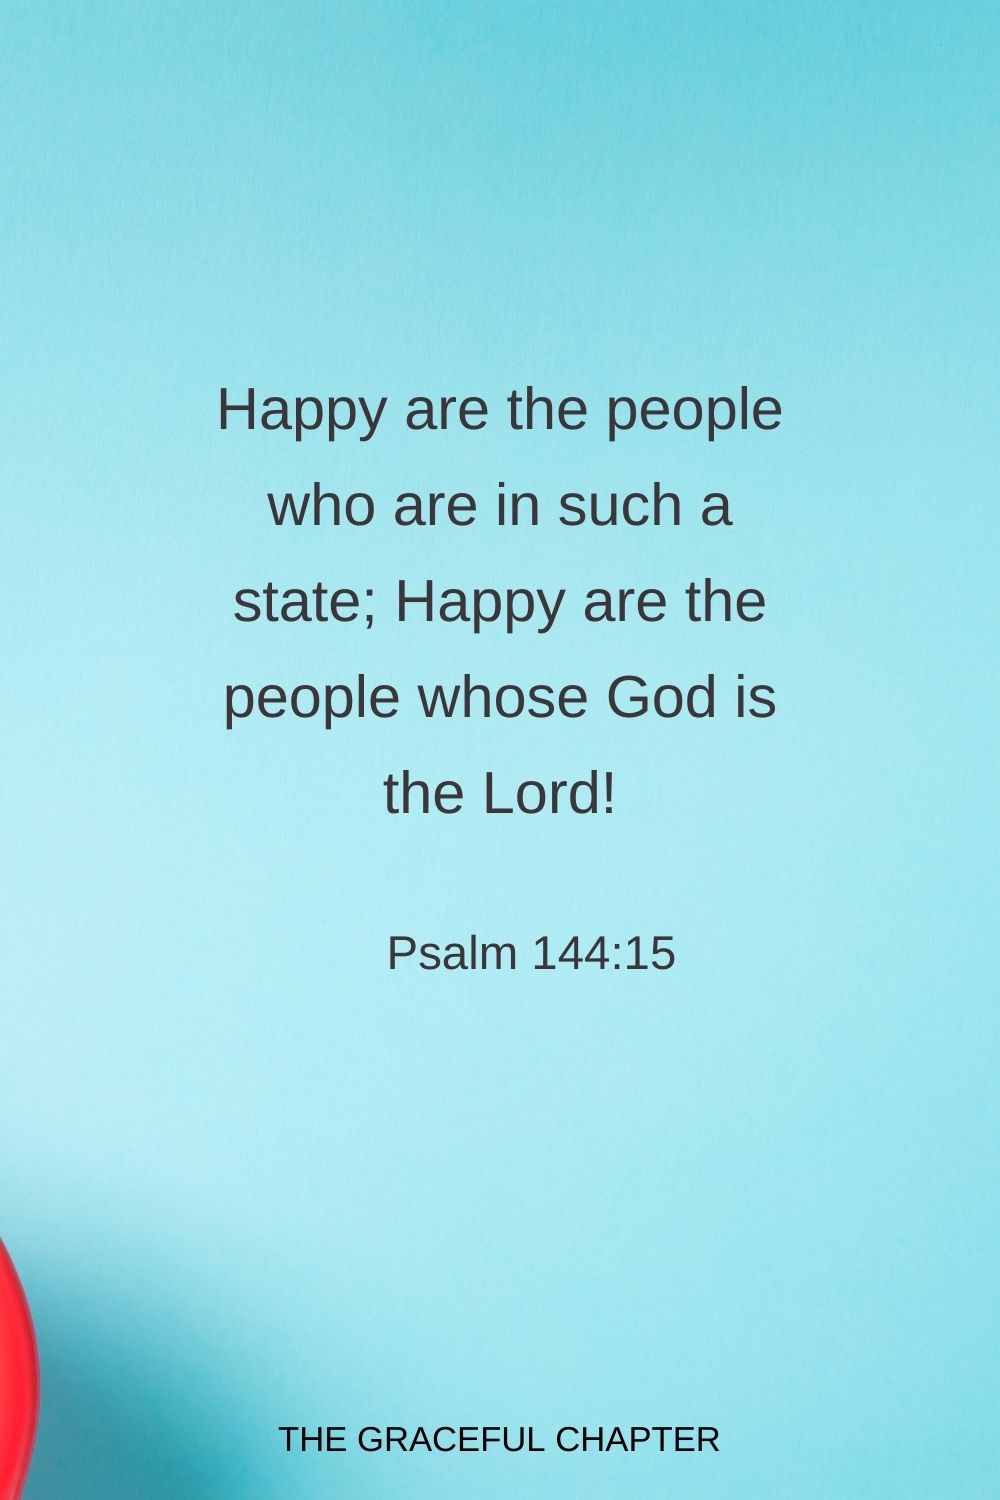 Happy are the people who are in such a state; Happy are the people whose God is the Lord! Psalm 144:15